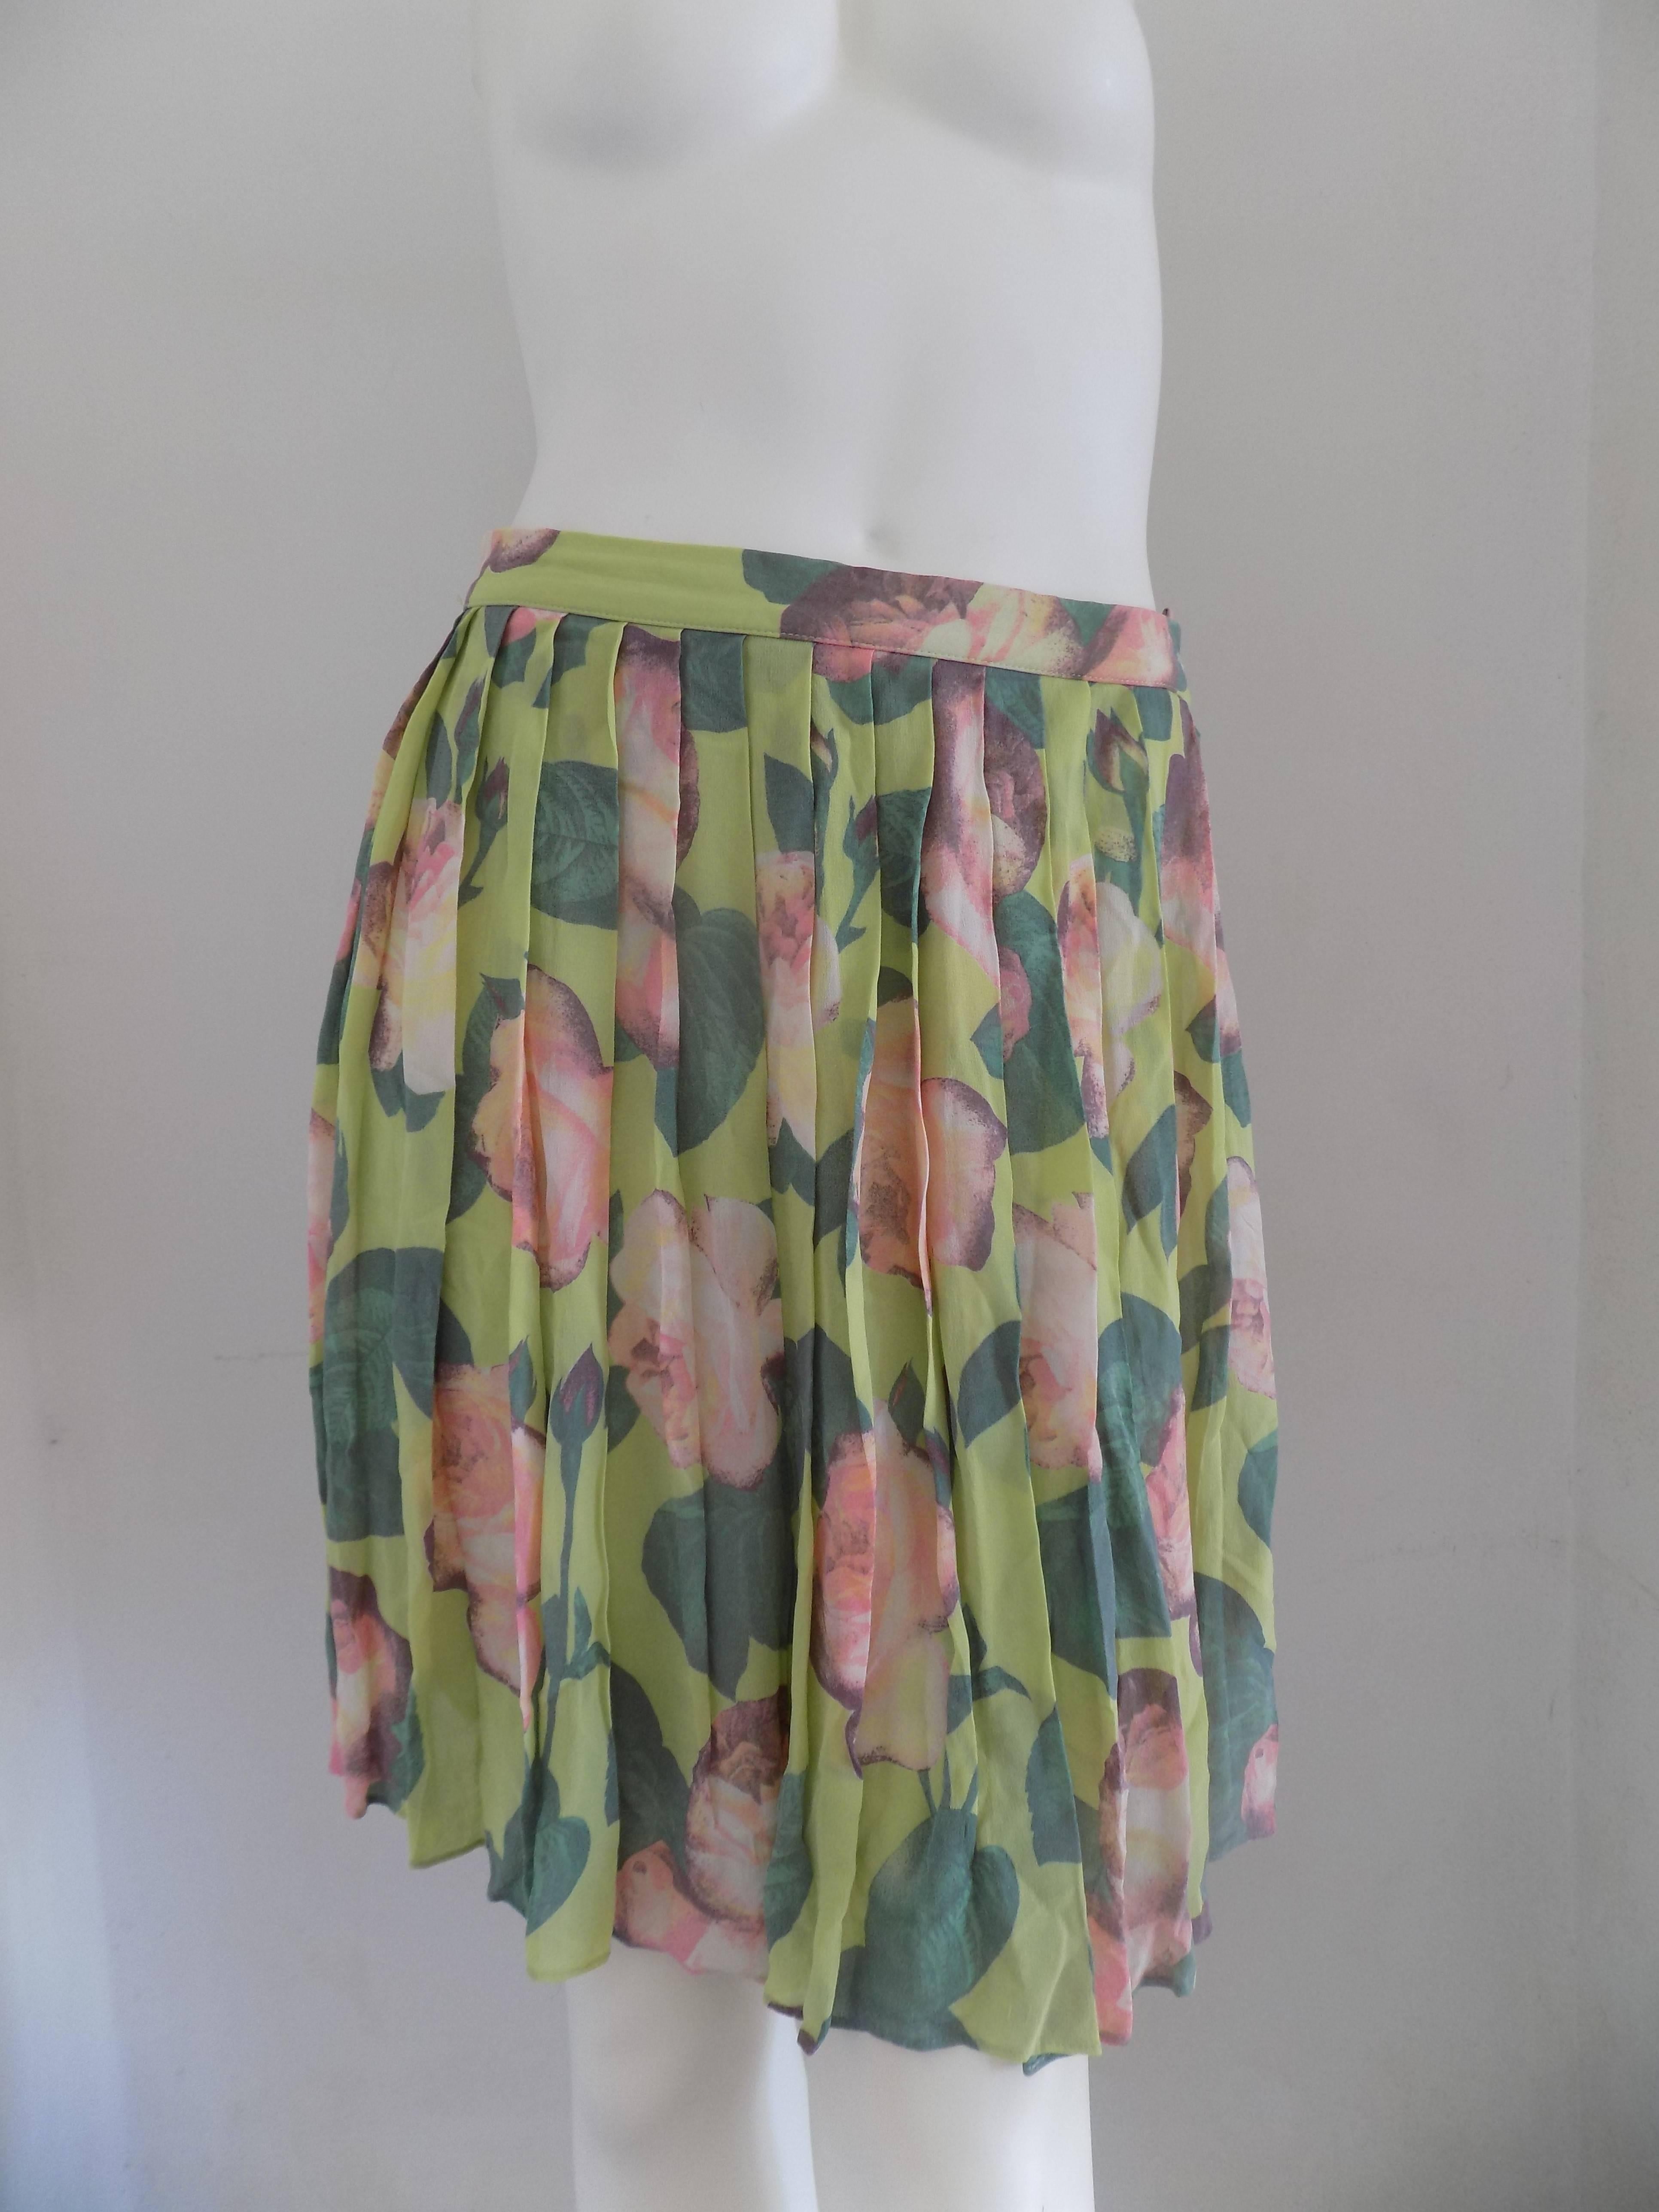 Blumarine Green Flowers Skirt
Totally made in italy 
Composition: 100% viscose